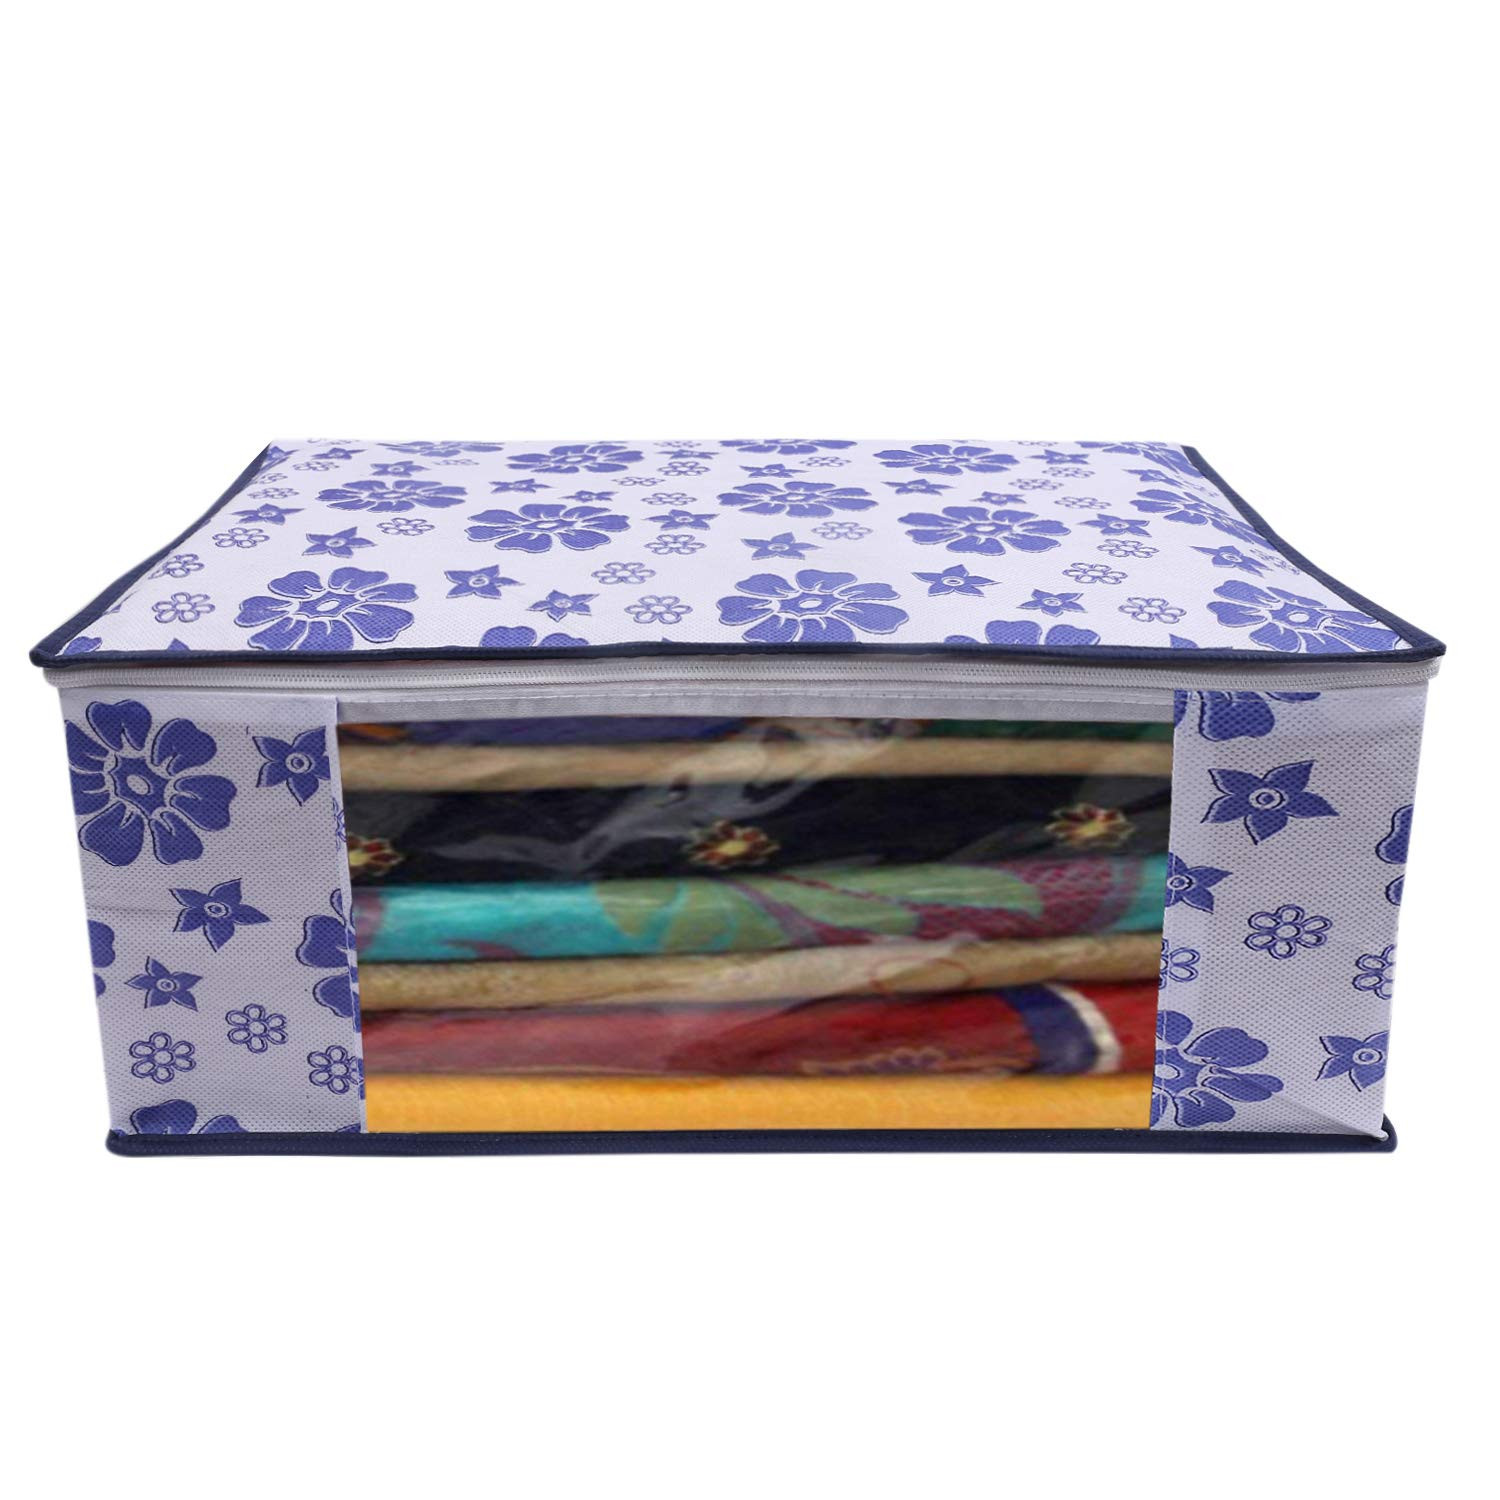 Kuber Industries Flower Printed Non Woven Saree Cover And Underbed Storage Bag, Cloth Organizer For Storage, Blanket Cover Combo Set (Royal Blue) -CTKTC38619